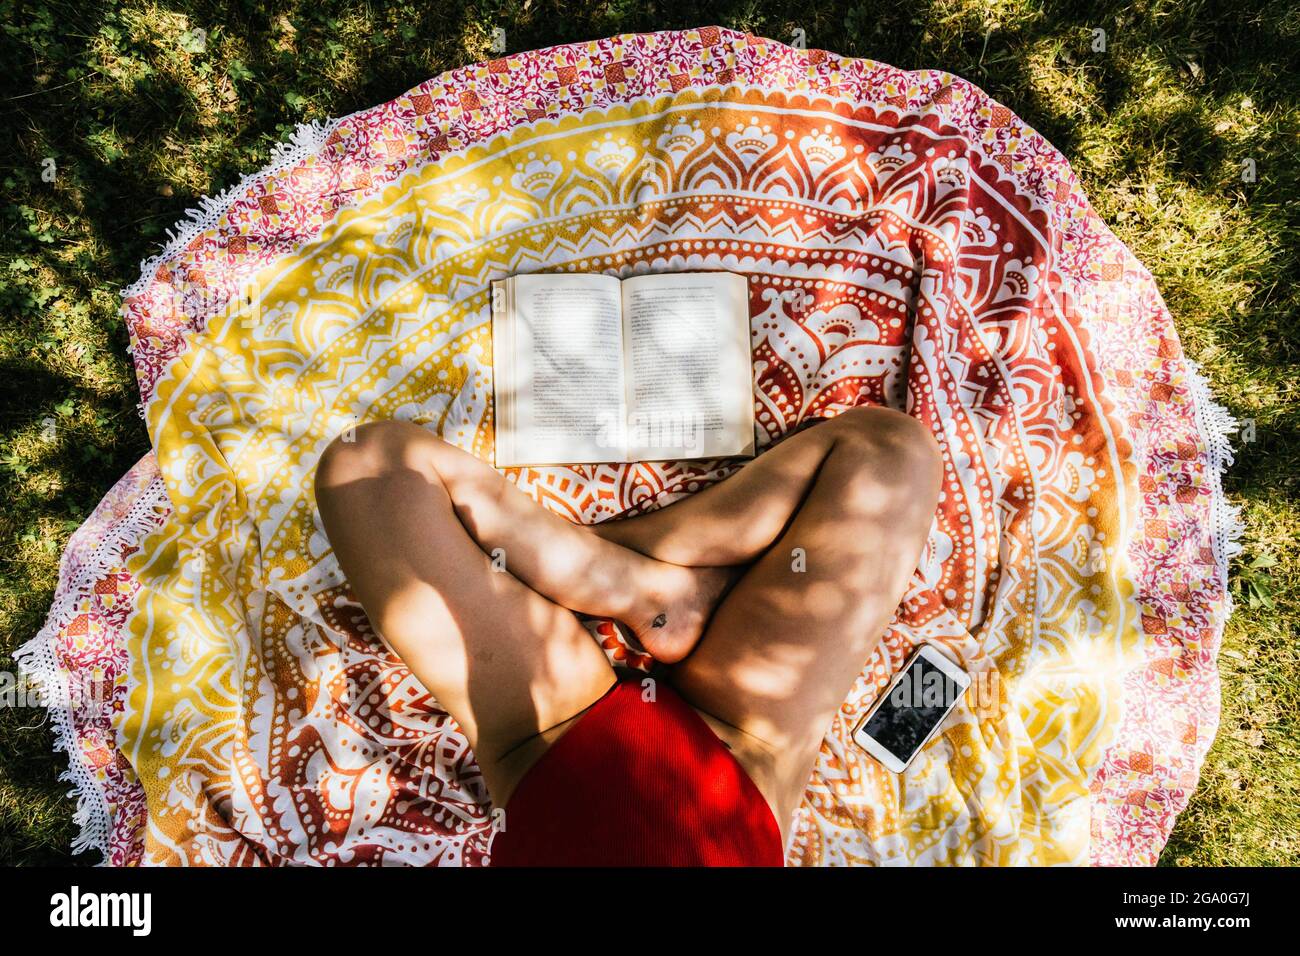 woman reading on a towel in the garden with swimsuit under a tree Stock Photo